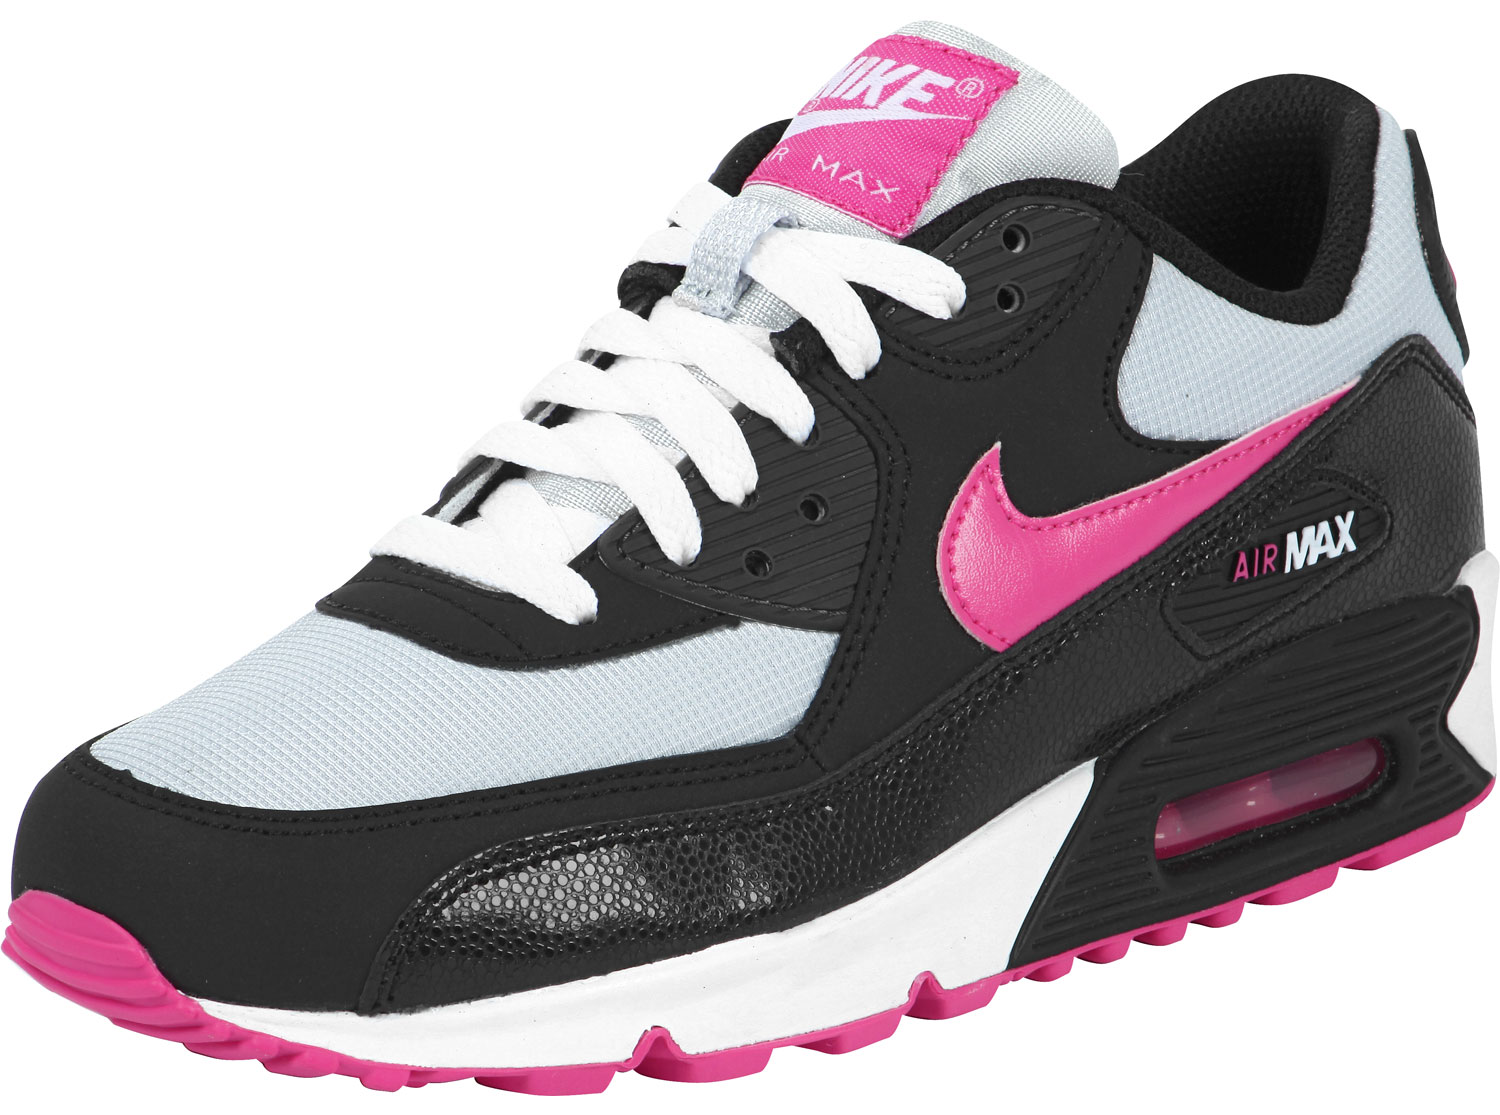 nike air max 90 youth gs chaussures noir blanc rose, Officiel Nike Air Max 90 Femme Noir et Rose Chaussures Akhapilat Offre Pas Cher2017412447